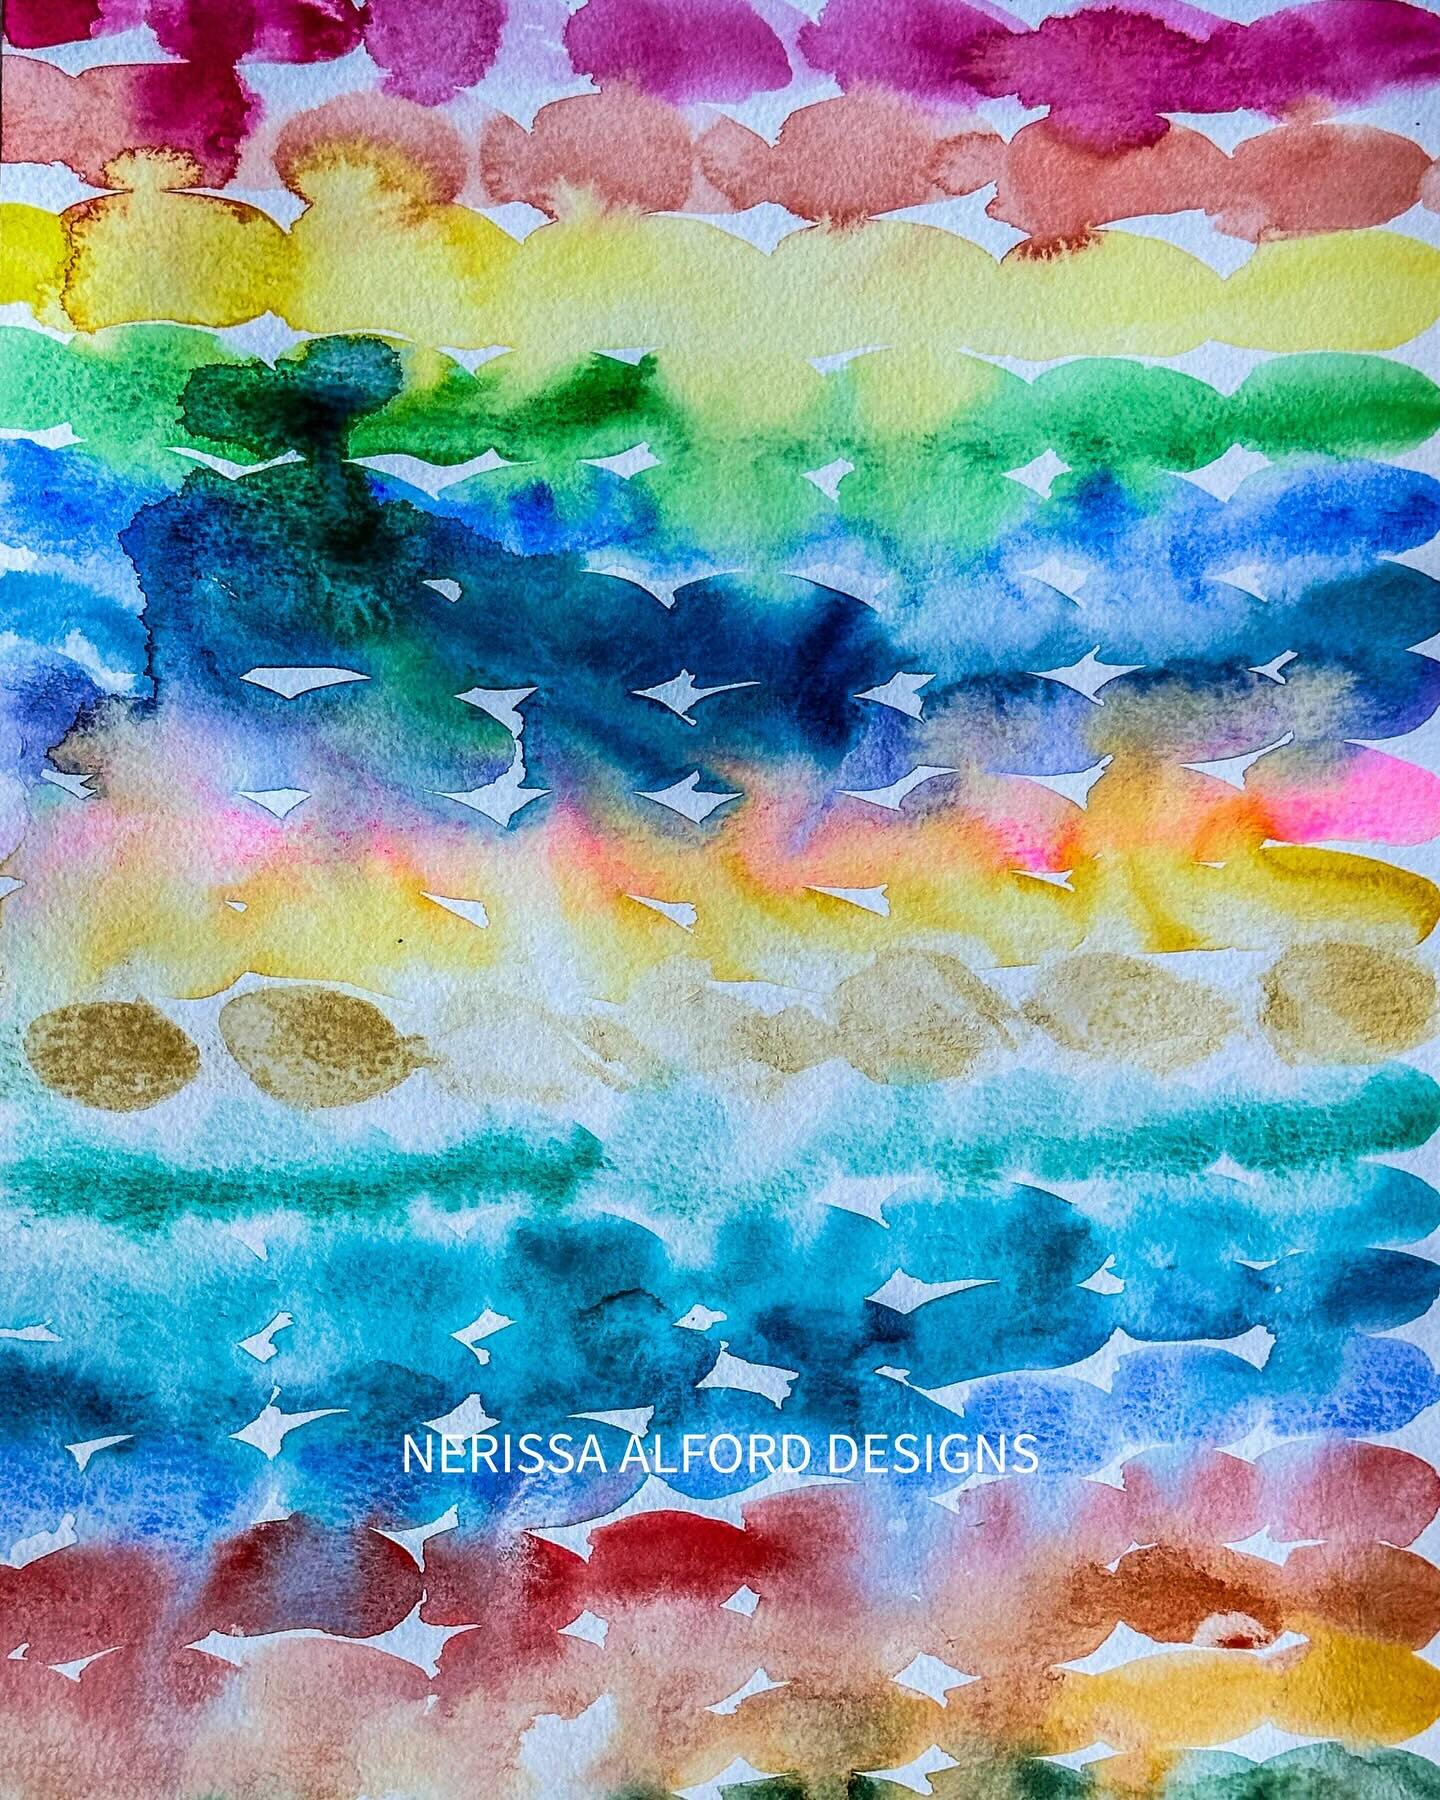 I have been mixing colors since @di.venter taught us during the October lesson of #fodderschool3 @fodder.school I cannot get enough of mixing watercolors 😍
This is my #roygbiv mix in traditional and not so traditional colors.